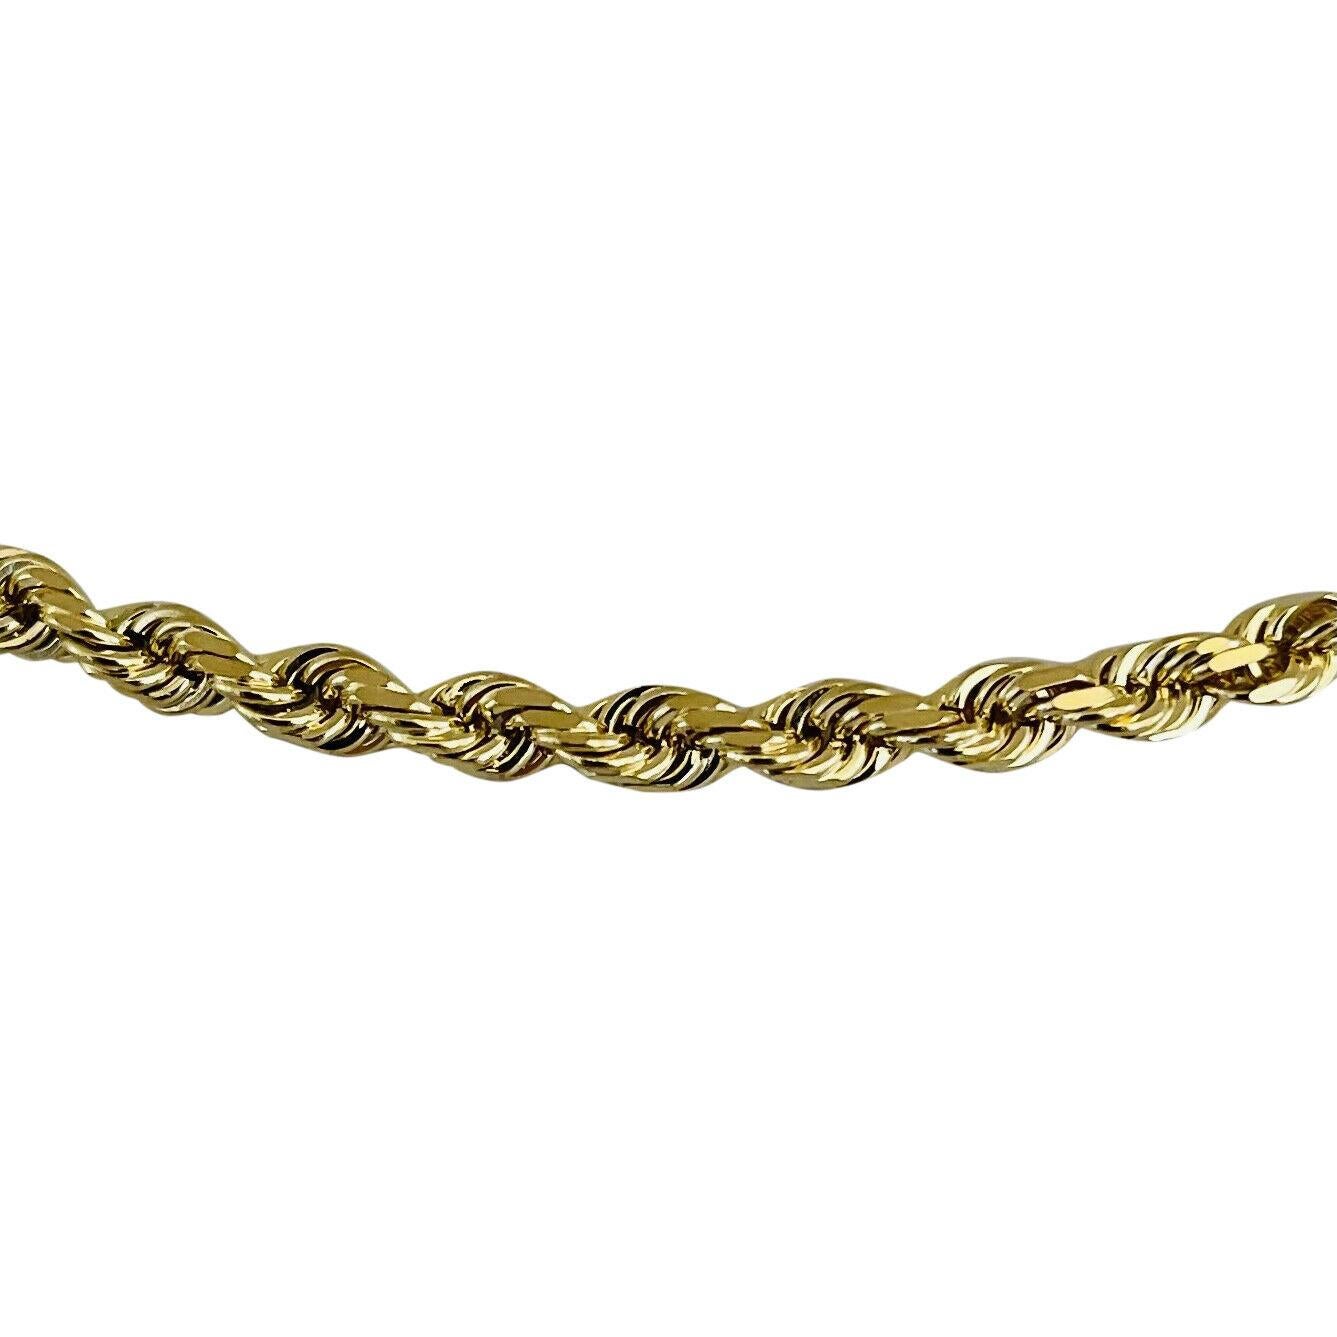 10k Yellow Gold 21g Solid 4mm Diamond Cut Rope Chain Necklace 18